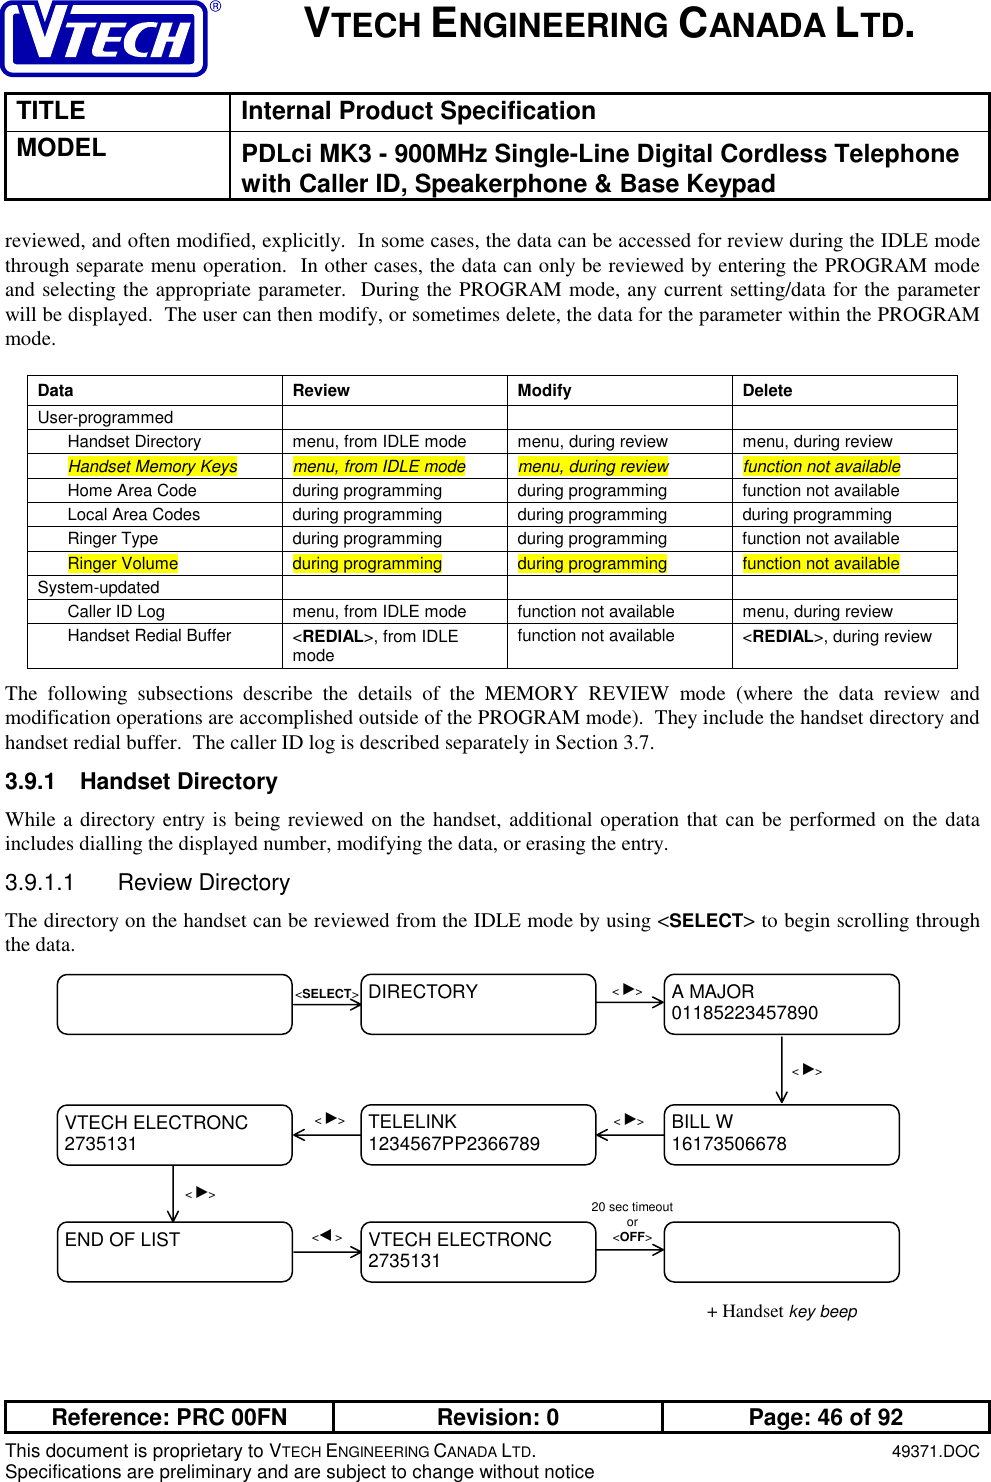 VTECH ENGINEERING CANADA LTD.TITLE Internal Product SpecificationMODEL PDLci MK3 - 900MHz Single-Line Digital Cordless Telephonewith Caller ID, Speakerphone &amp; Base KeypadReference: PRC 00FN Revision: 0 Page: 46 of 92This document is proprietary to VTECH ENGINEERING CANADA LTD.49371.DOCSpecifications are preliminary and are subject to change without noticereviewed, and often modified, explicitly.  In some cases, the data can be accessed for review during the IDLE modethrough separate menu operation.  In other cases, the data can only be reviewed by entering the PROGRAM modeand selecting the appropriate parameter.  During the PROGRAM mode, any current setting/data for the parameterwill be displayed.  The user can then modify, or sometimes delete, the data for the parameter within the PROGRAMmode.Data Review Modify DeleteUser-programmedHandset Directory menu, from IDLE mode menu, during review menu, during reviewHandset Memory Keys menu, from IDLE mode menu, during review function not availableHome Area Code during programming during programming function not availableLocal Area Codes during programming during programming during programmingRinger Type during programming during programming function not availableRinger Volume during programming during programming function not availableSystem-updatedCaller ID Log menu, from IDLE mode function not available menu, during reviewHandset Redial Buffer &lt;REDIAL&gt;, from IDLEmode function not available &lt;REDIAL&gt;, during reviewThe following subsections describe the details of the MEMORY REVIEW mode (where the data review andmodification operations are accomplished outside of the PROGRAM mode).  They include the handset directory andhandset redial buffer.  The caller ID log is described separately in Section 3.7.3.9.1 Handset DirectoryWhile a directory entry is being reviewed on the handset, additional operation that can be performed on the dataincludes dialling the displayed number, modifying the data, or erasing the entry.3.9.1.1 Review DirectoryThe directory on the handset can be reviewed from the IDLE mode by using &lt;SELECT&gt; to begin scrolling throughthe data.+ Handset key beepTELELINK1234567PP2366789VTECH ELECTRONC2735131 BILL W16173506678A MAJOR01185223457890DIRECTORY &lt; ►&gt;&lt;SELECT&gt;&lt; ►&gt;&lt; ►&gt;END OF LIST VTECH ELECTRONC2735131&lt;◄ &gt;&lt; ►&gt;&lt; ►&gt;20 sec timeoutor&lt;OFF&gt;